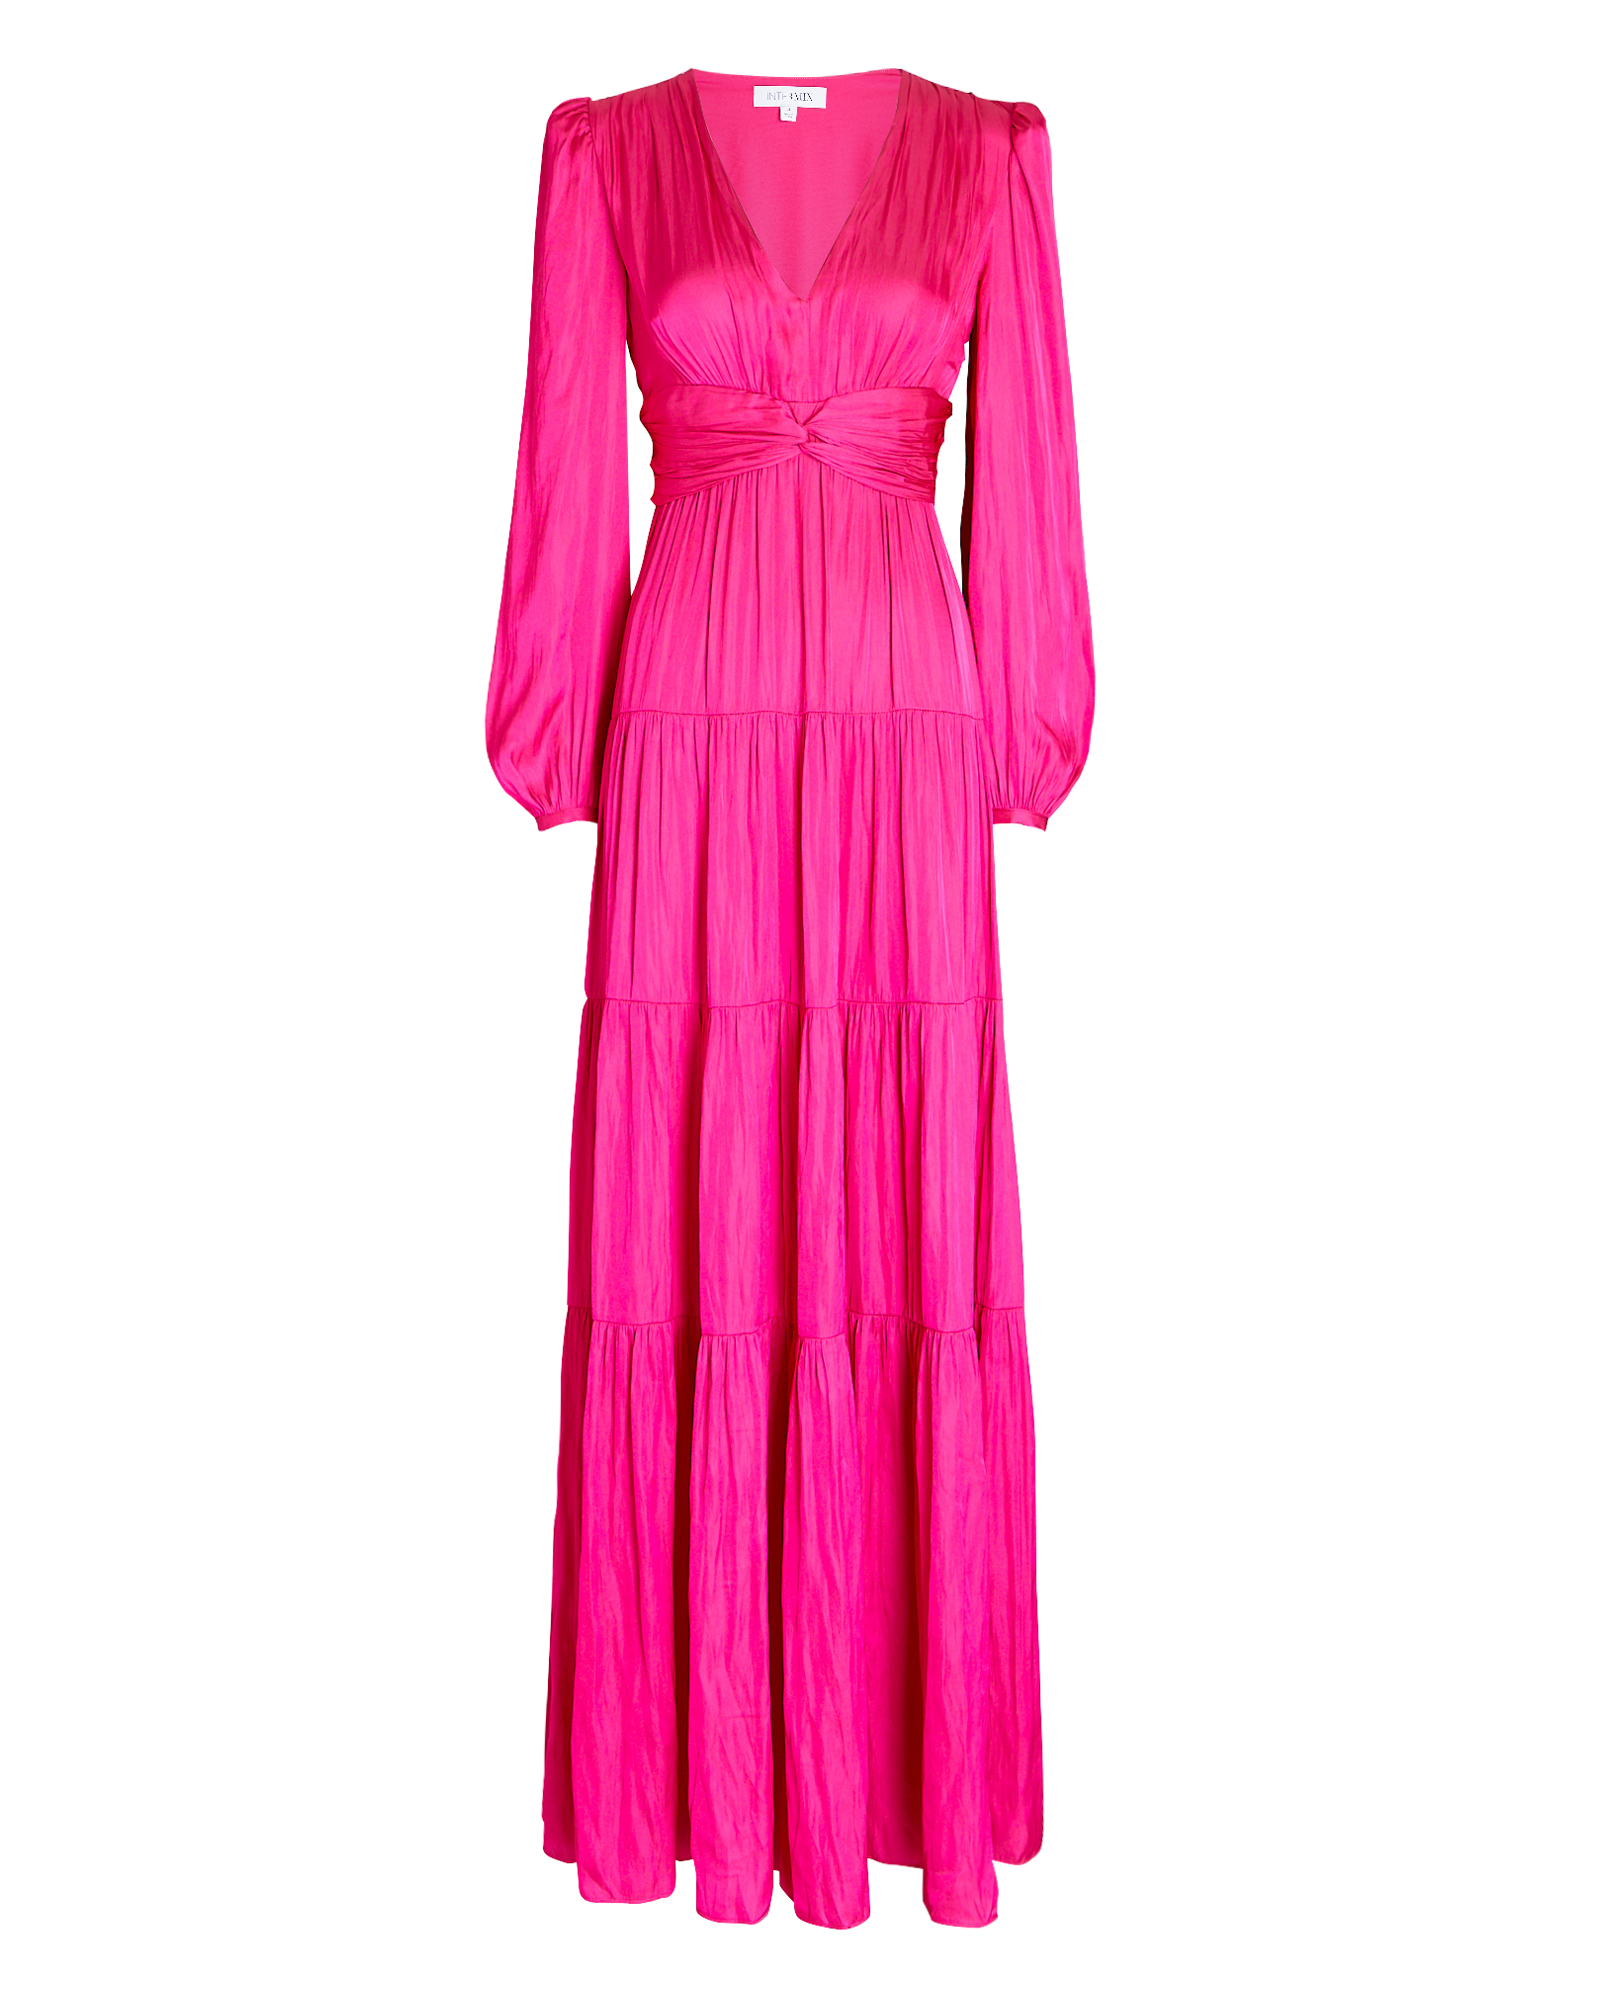 INTERMIX Private Label Lela Gown In Pink | INTERMIX®